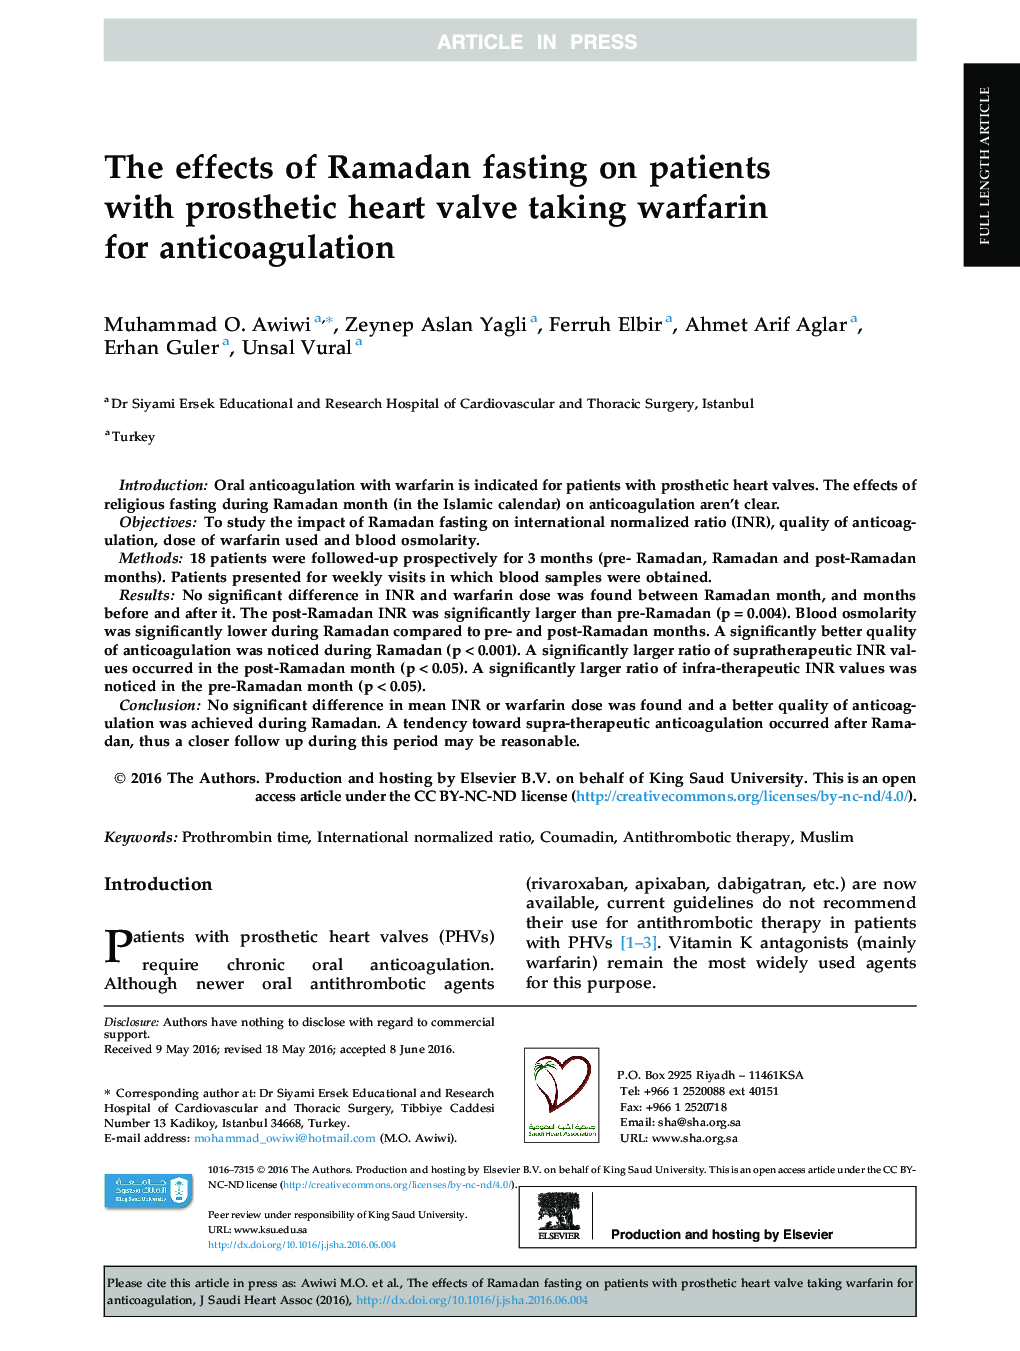 The effects of Ramadan fasting on patients with prosthetic heart valve taking warfarin for anticoagulation